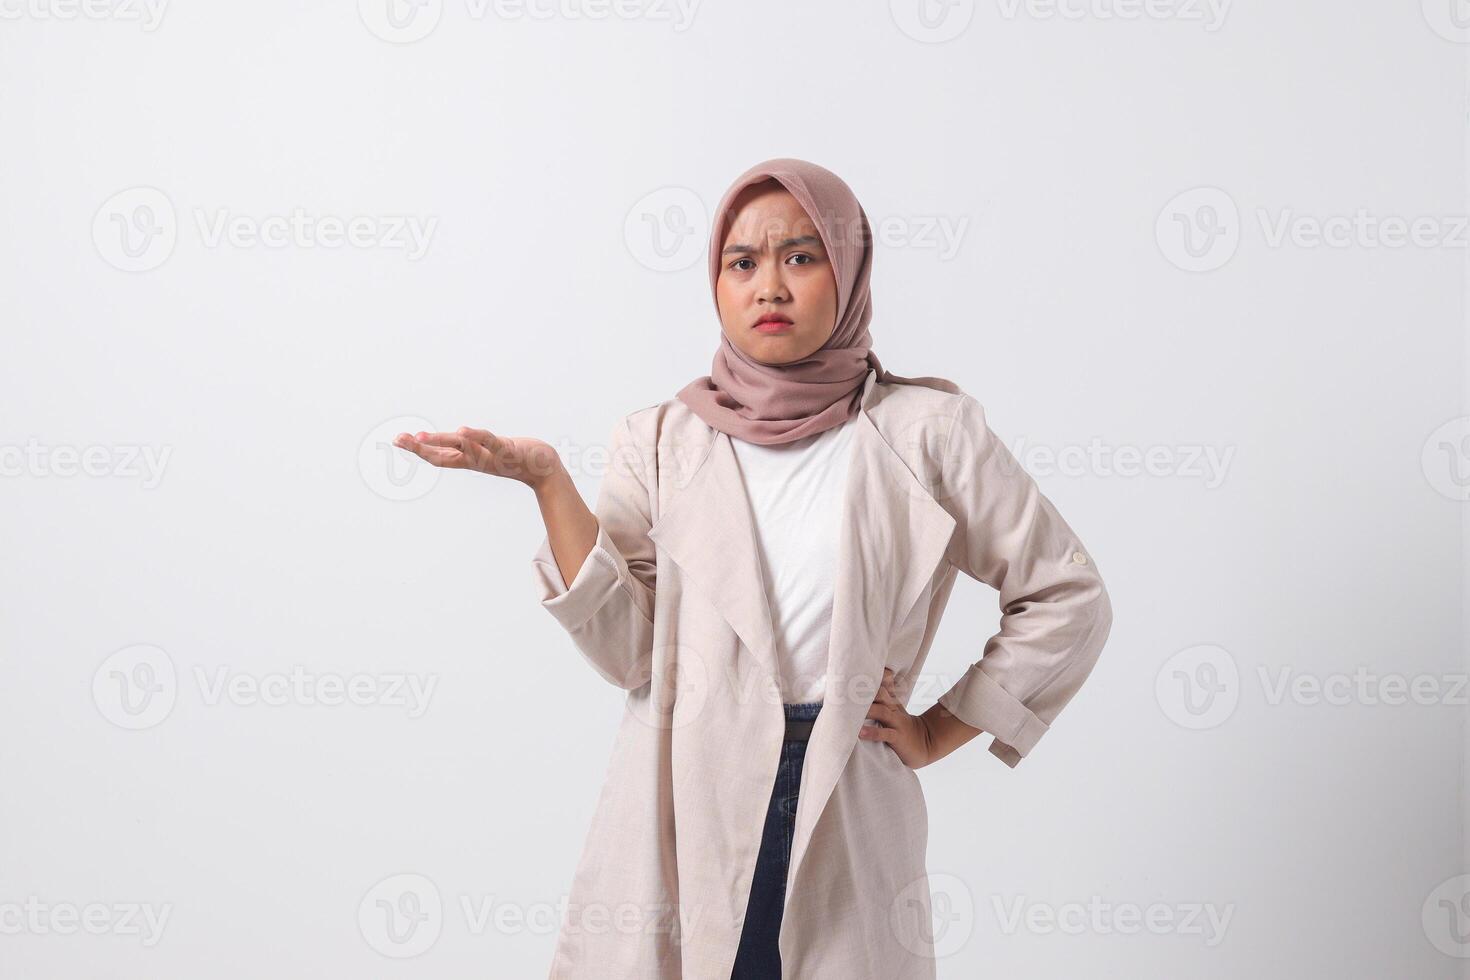 Portrait of confused Asian hijab woman in casual suit spreading hands sideways, feeling doubt while making choice. Businesswoman concept. Isolated image on white background photo